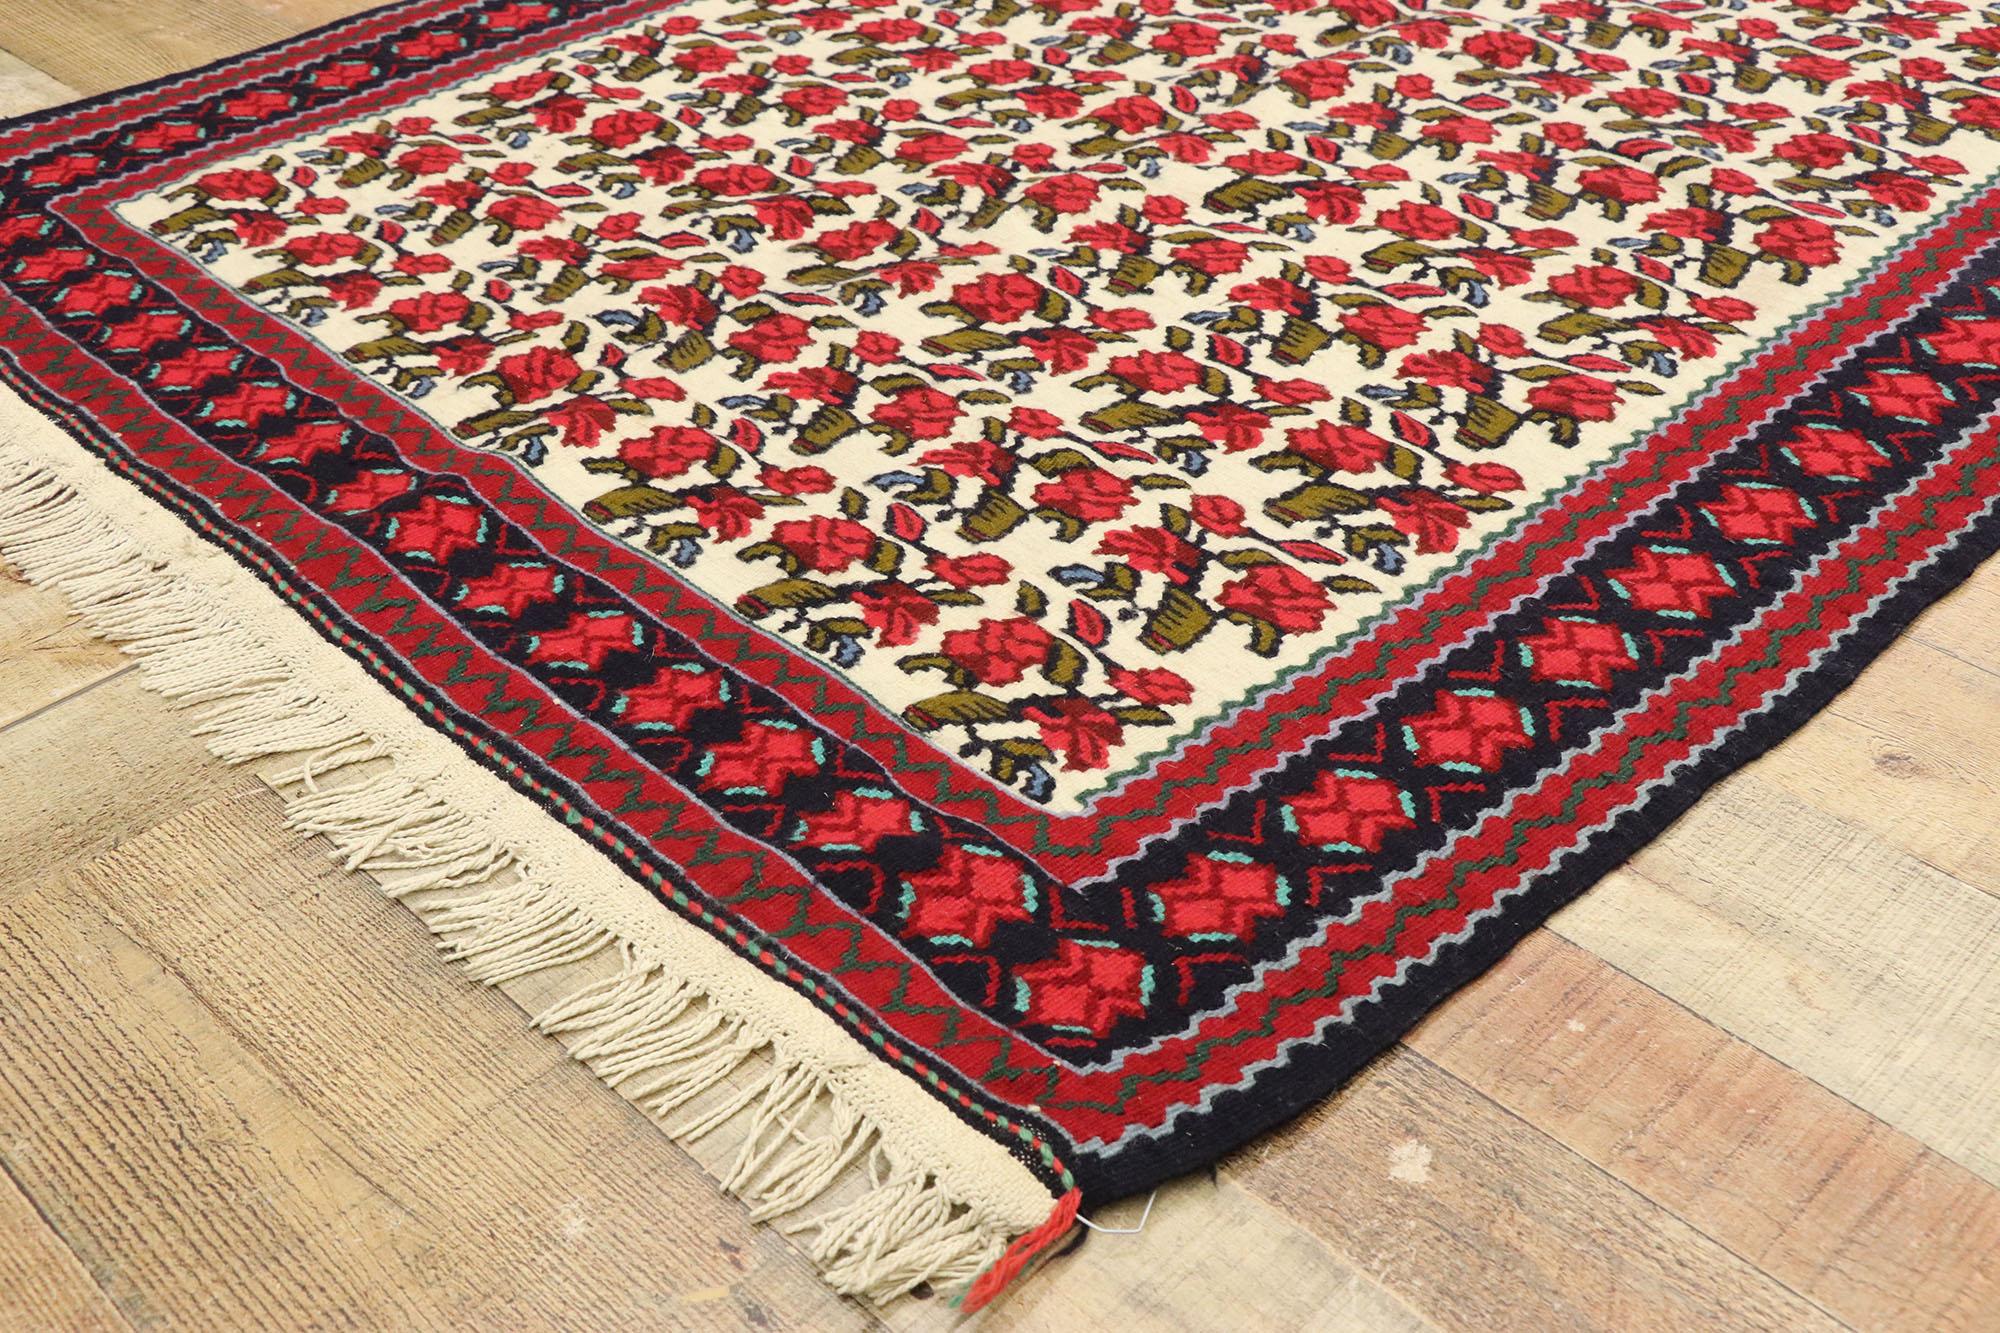 20th Century Vintage Persian Floral Kilim Rug with English Tudor Manor House Style